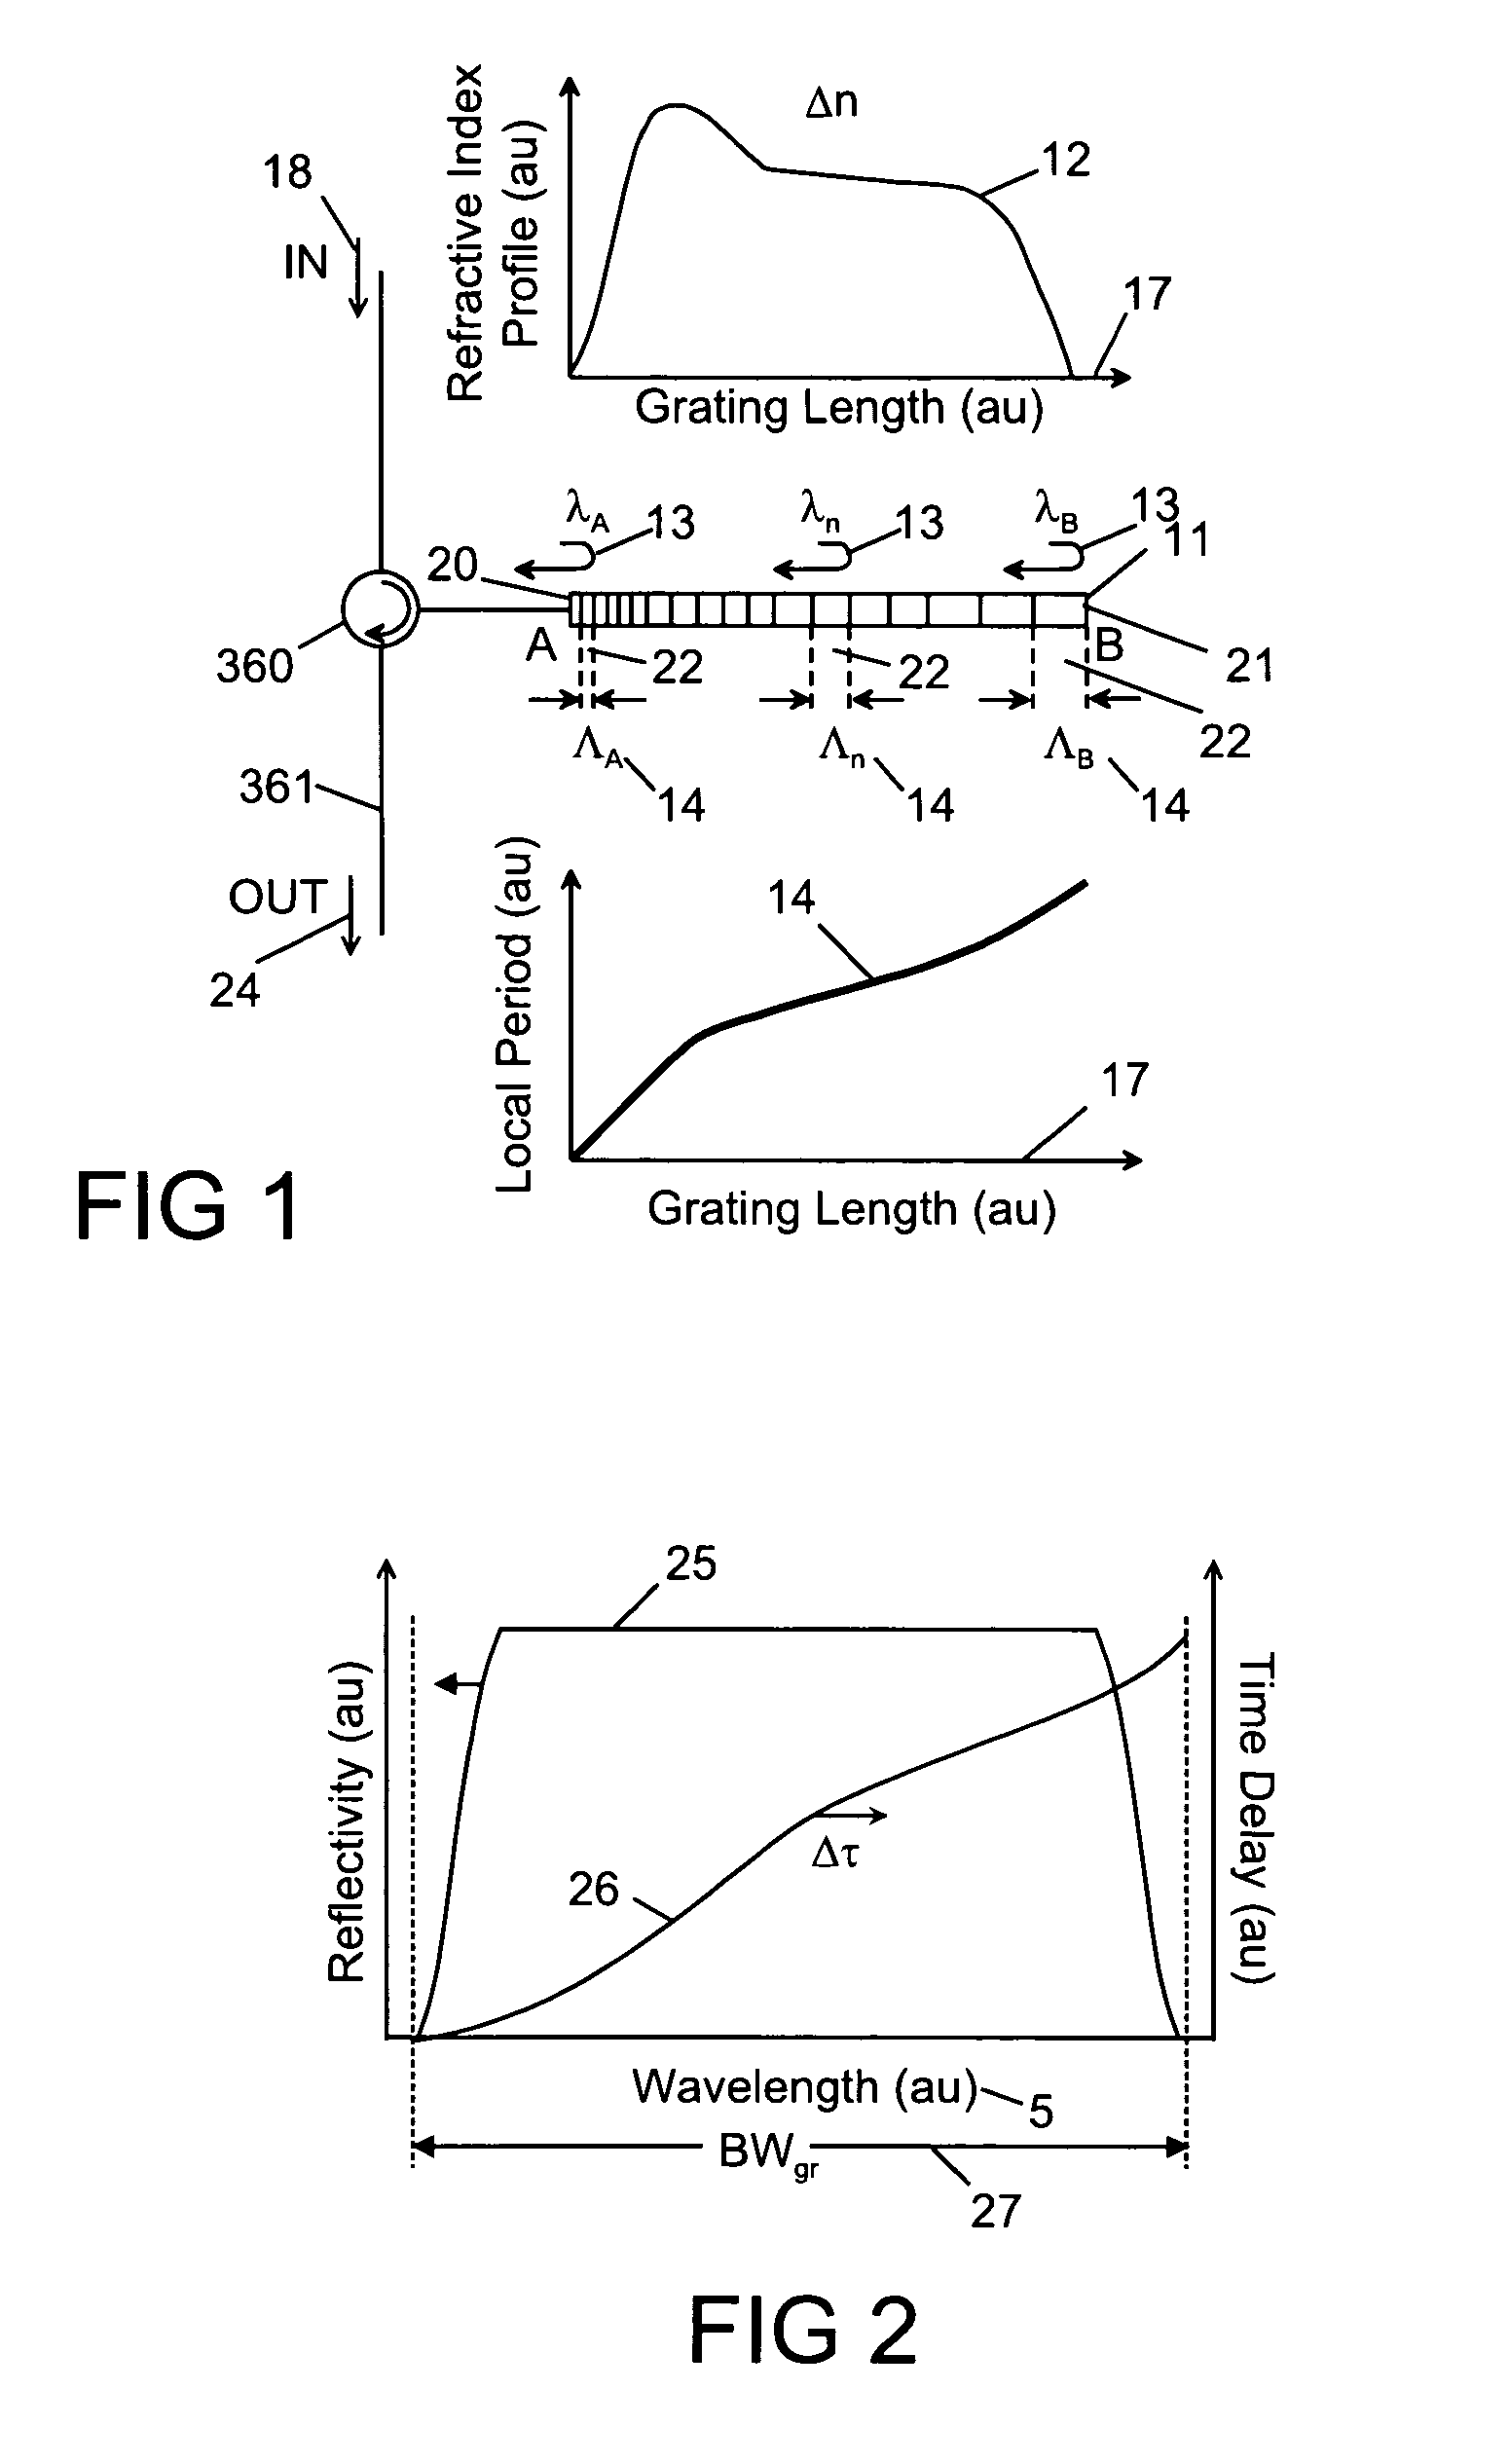 Apparatus for dispersion compensating a signal that propagates along a signal path